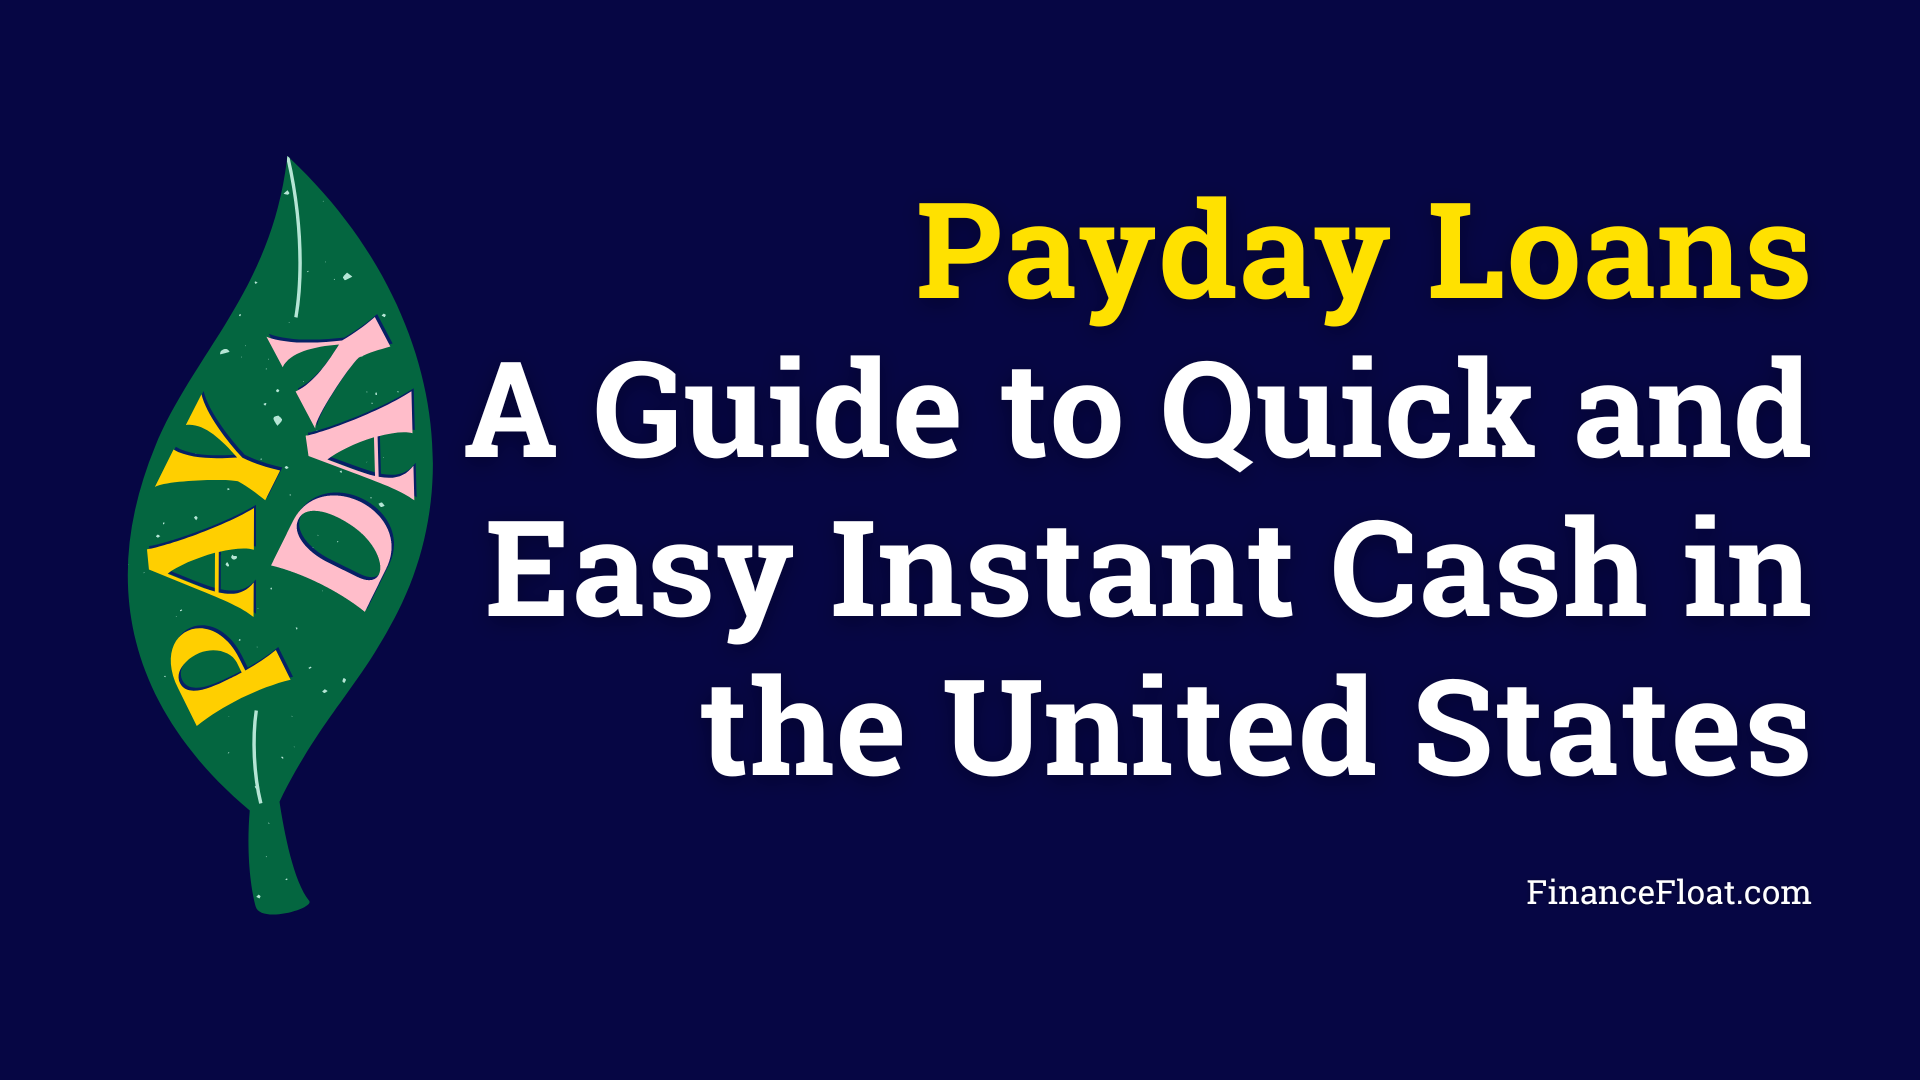 Payday Loans A Guide to Quick and Easy Instant Cash in the United States